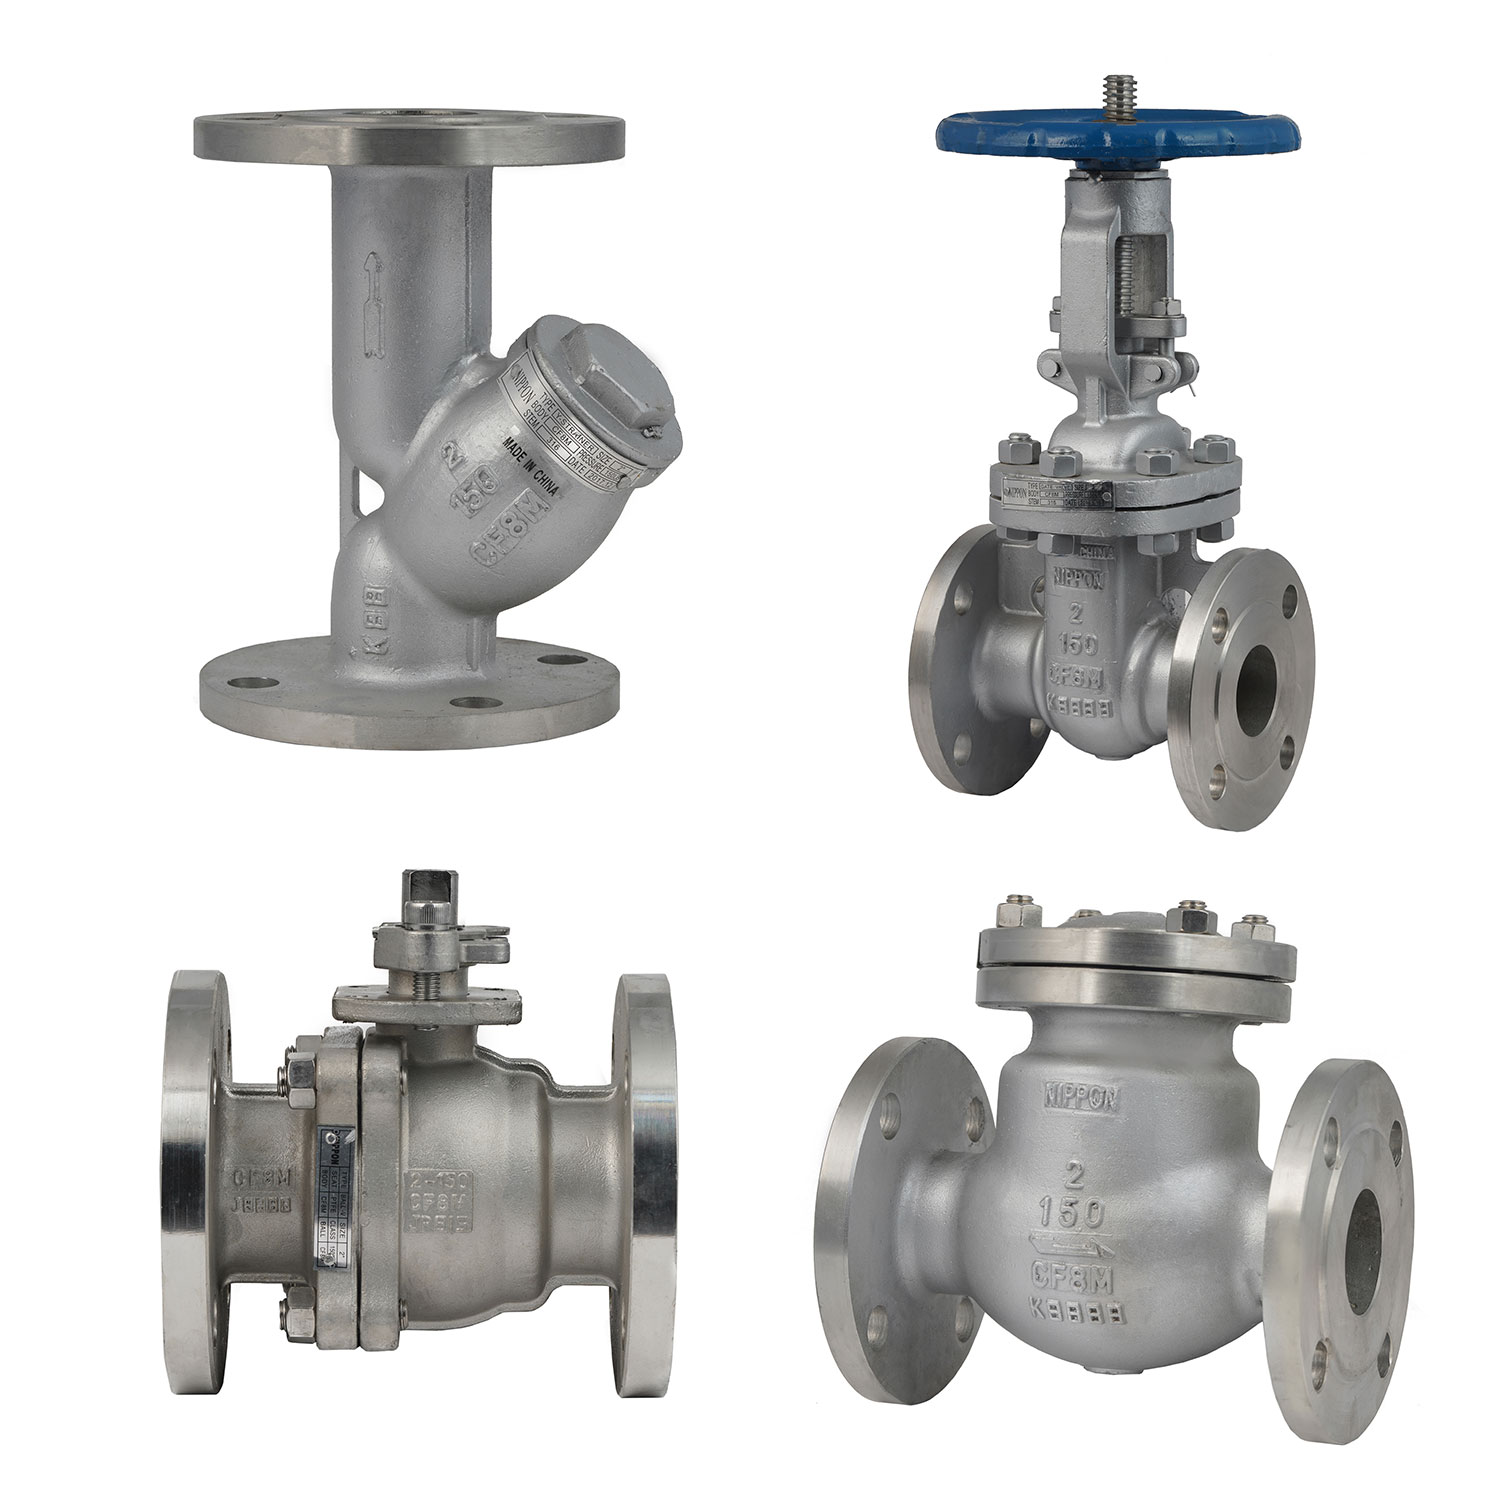 Class 150 Stainless Steel (CF8M) Flanged End Valves with (NIPPON-KITZ-KITZ STEEL) Brands